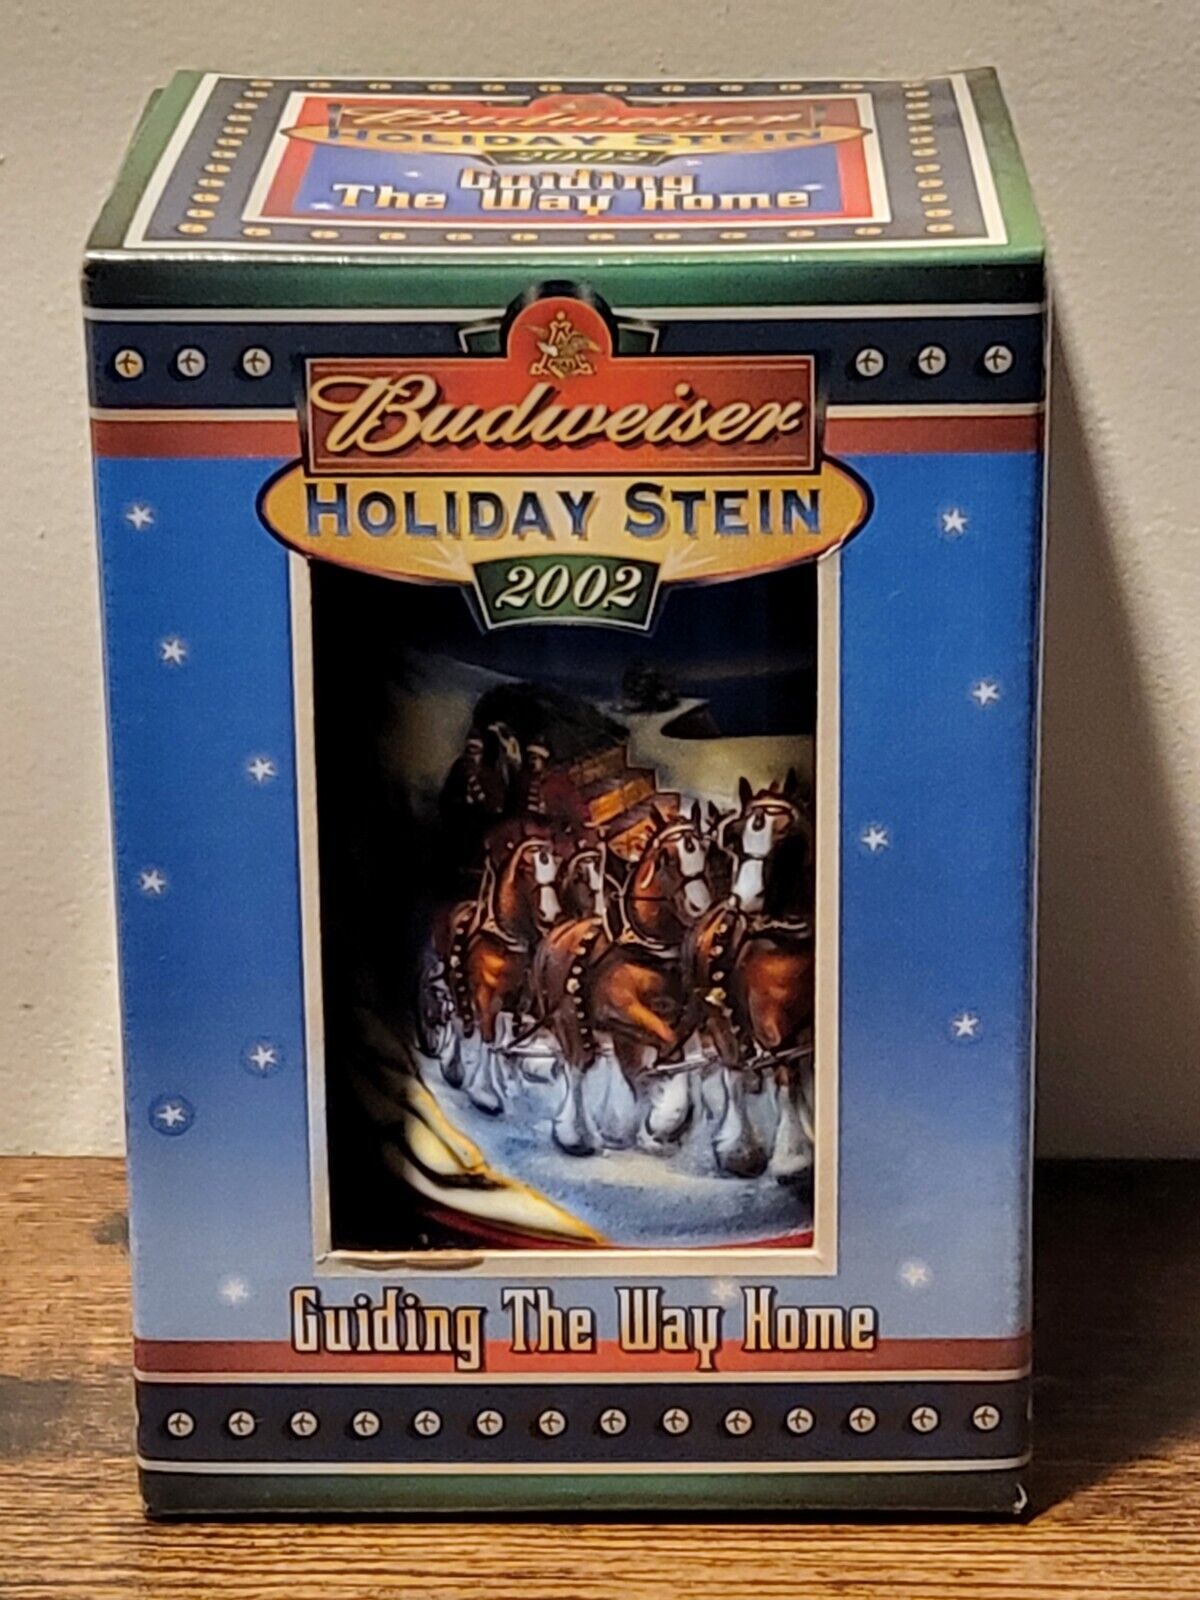 Budweiser Holiday Stein Guiding The Way Home Beer 2002 Clydesdale W/Box & COA.